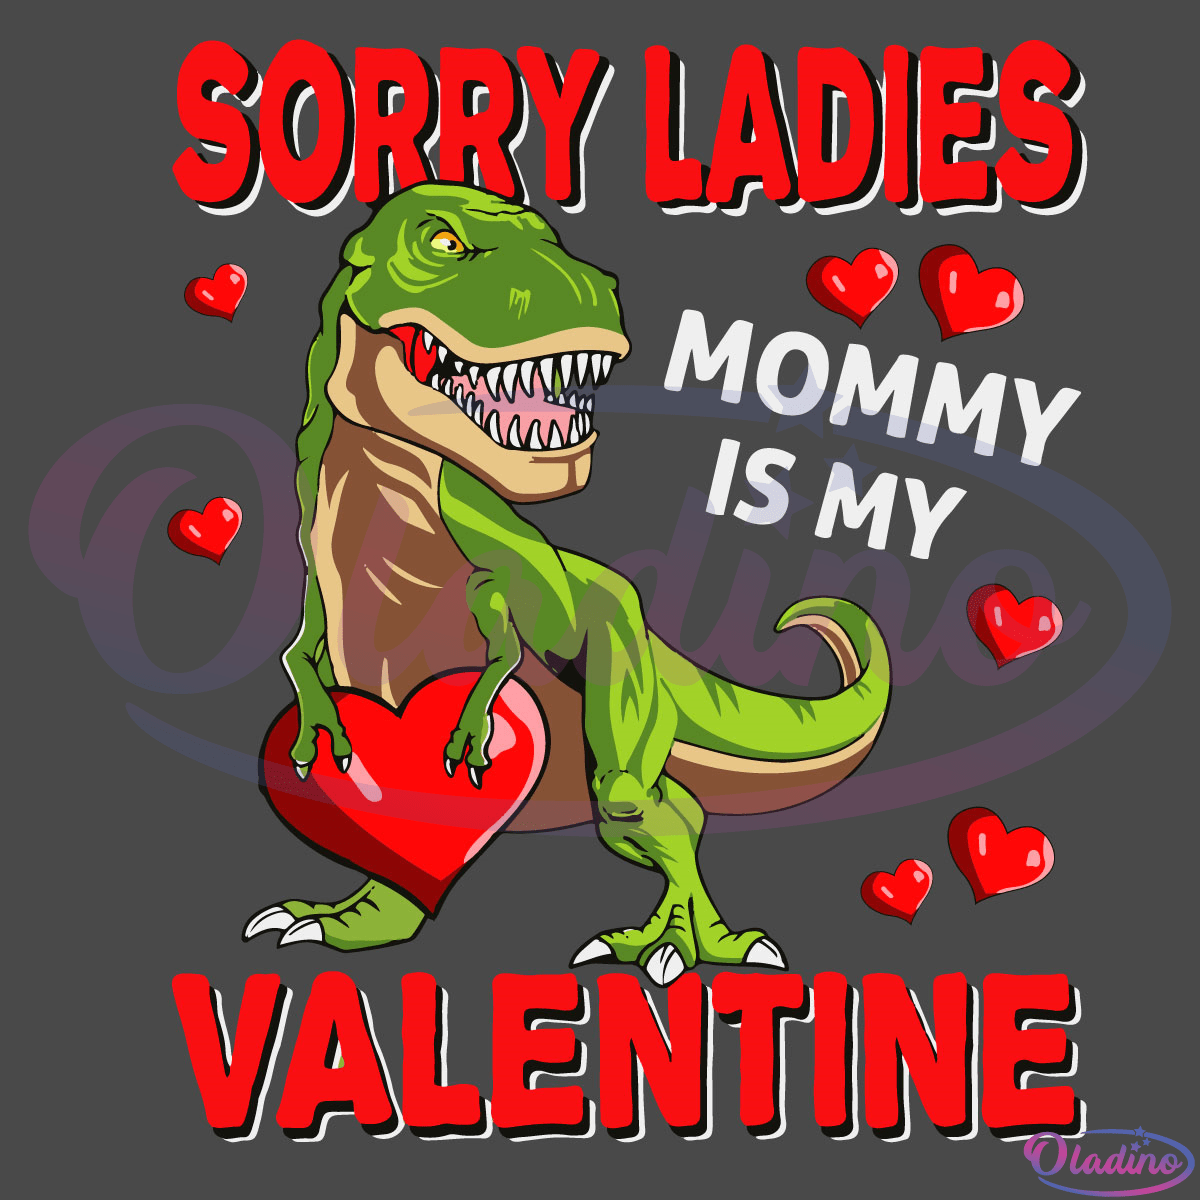 Sorry Ladies Mommy Is My Valentine Svg Digital File, Mommy Svg